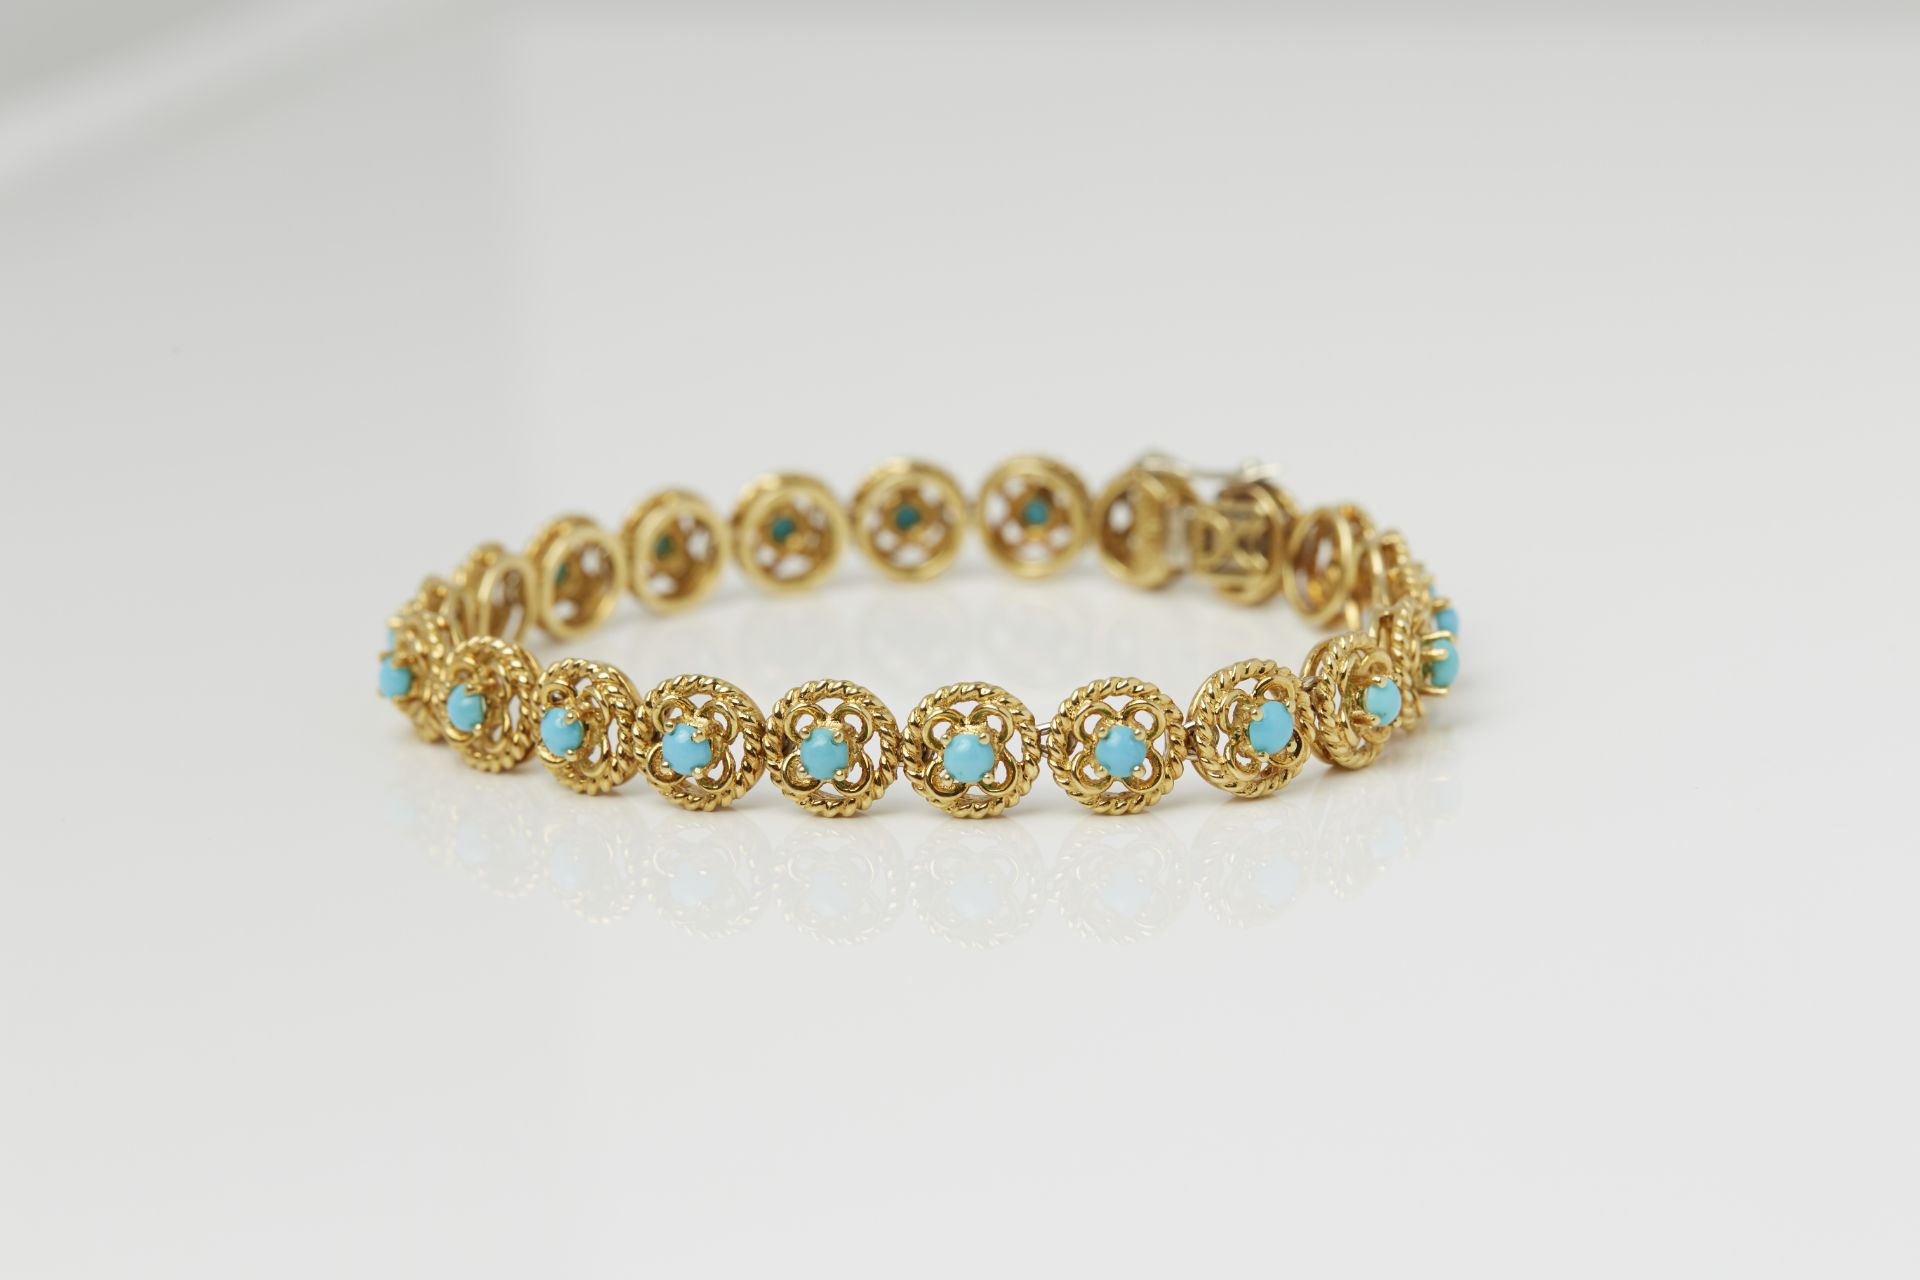 Cartier 18k Yellow Gold Turquoise Bracelet - Image 7 of 12